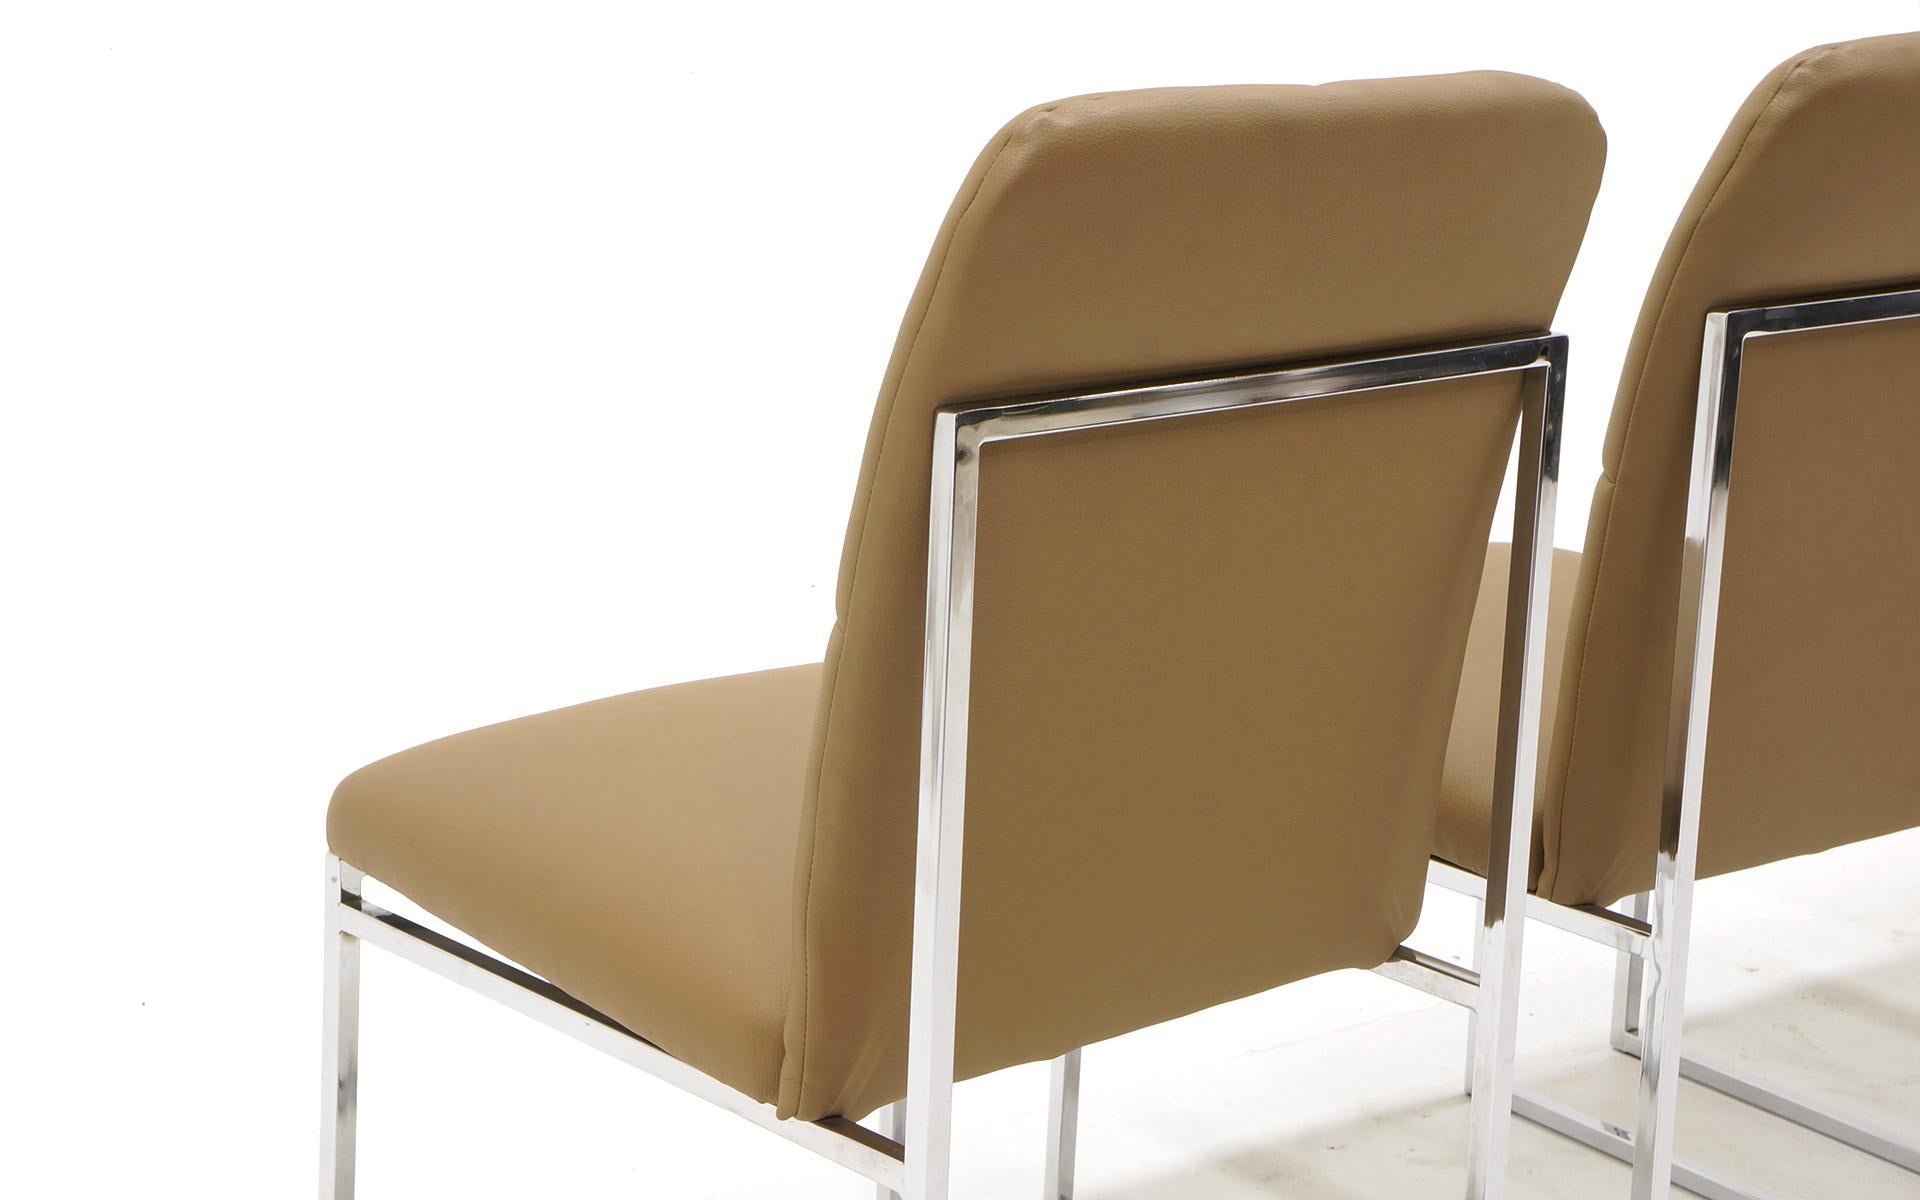 Late 20th Century Milo Baughman Dining Chairs, Set of Four, Chrome and Tan Leather